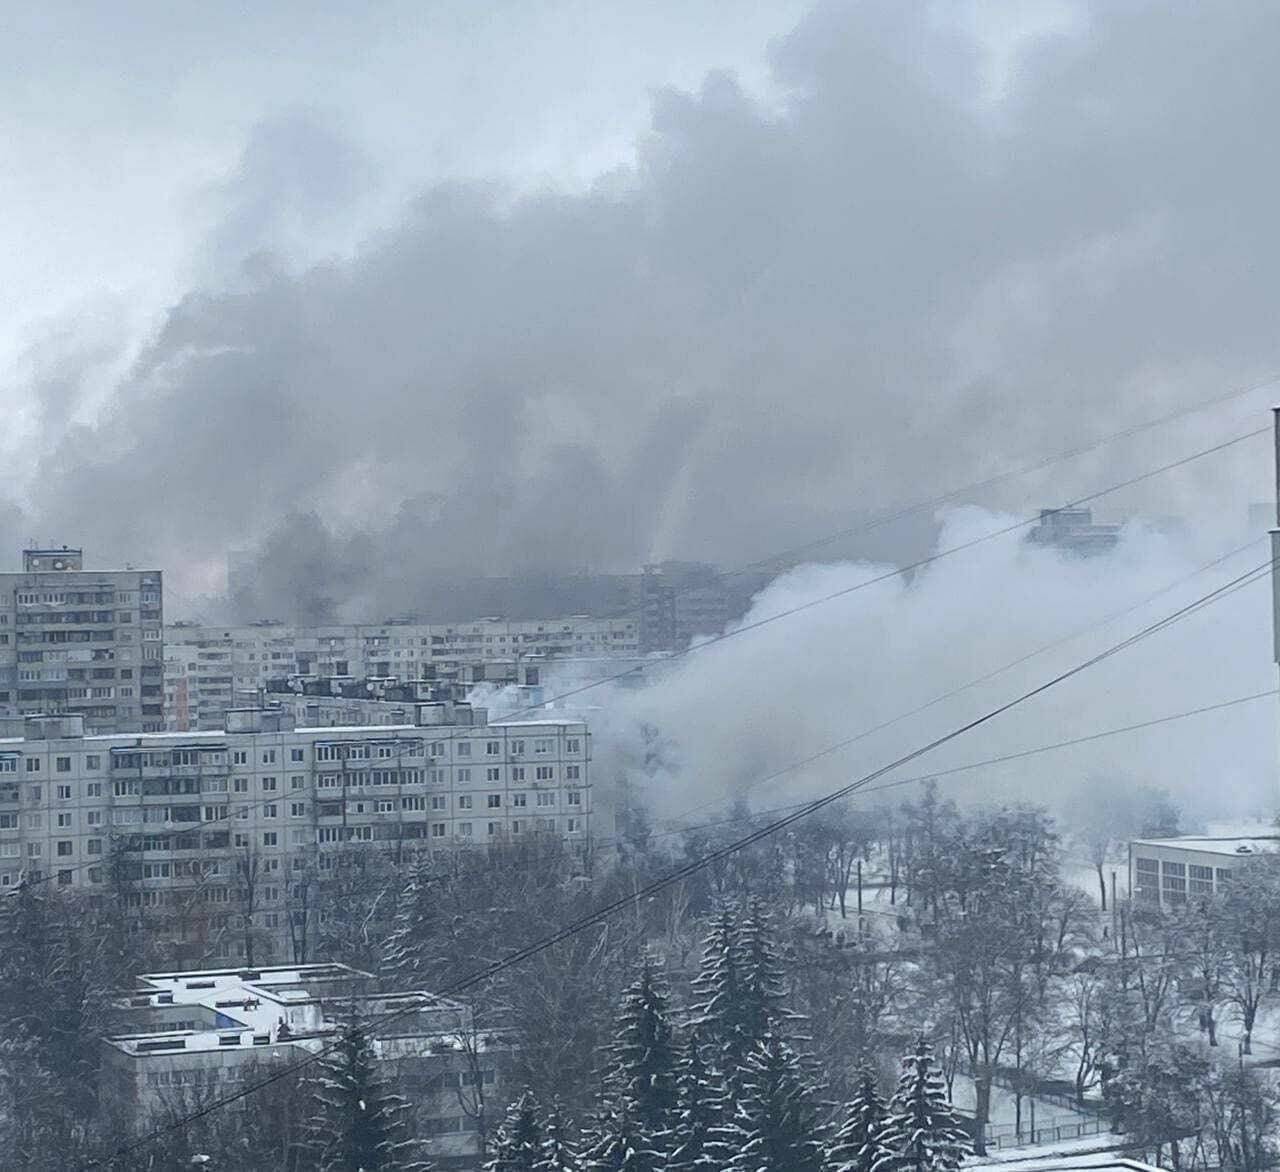 Smoke rises from Kharkiv apartment buildings following a Russian missile bombardment. The image is of an area near the family’s apartment building, taken by a friend of Straner’s father. Submitted photo.